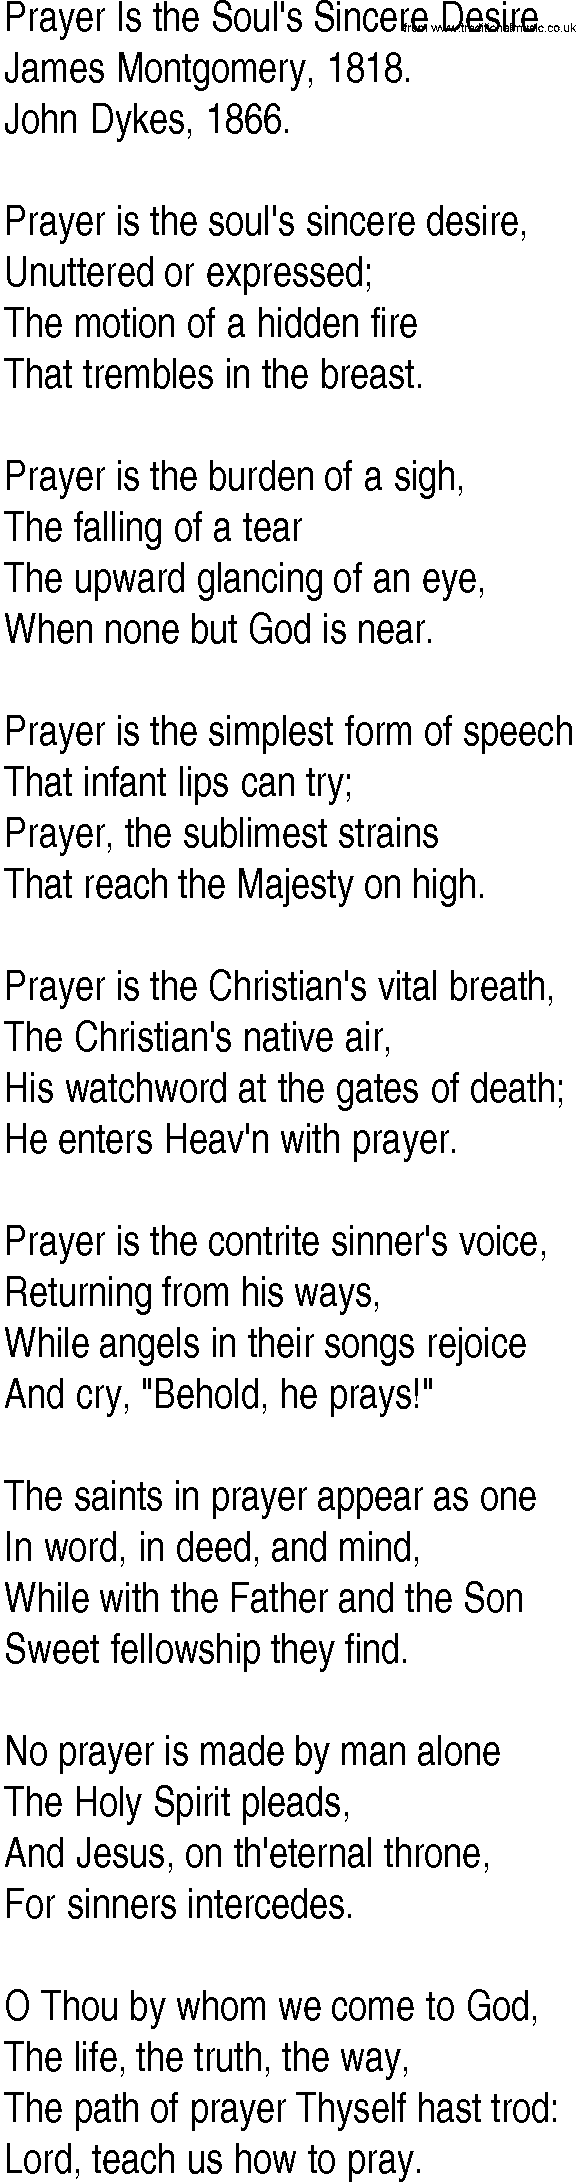 Hymn and Gospel Song: Prayer Is the Soul's Sincere Desire by James Montgomery lyrics